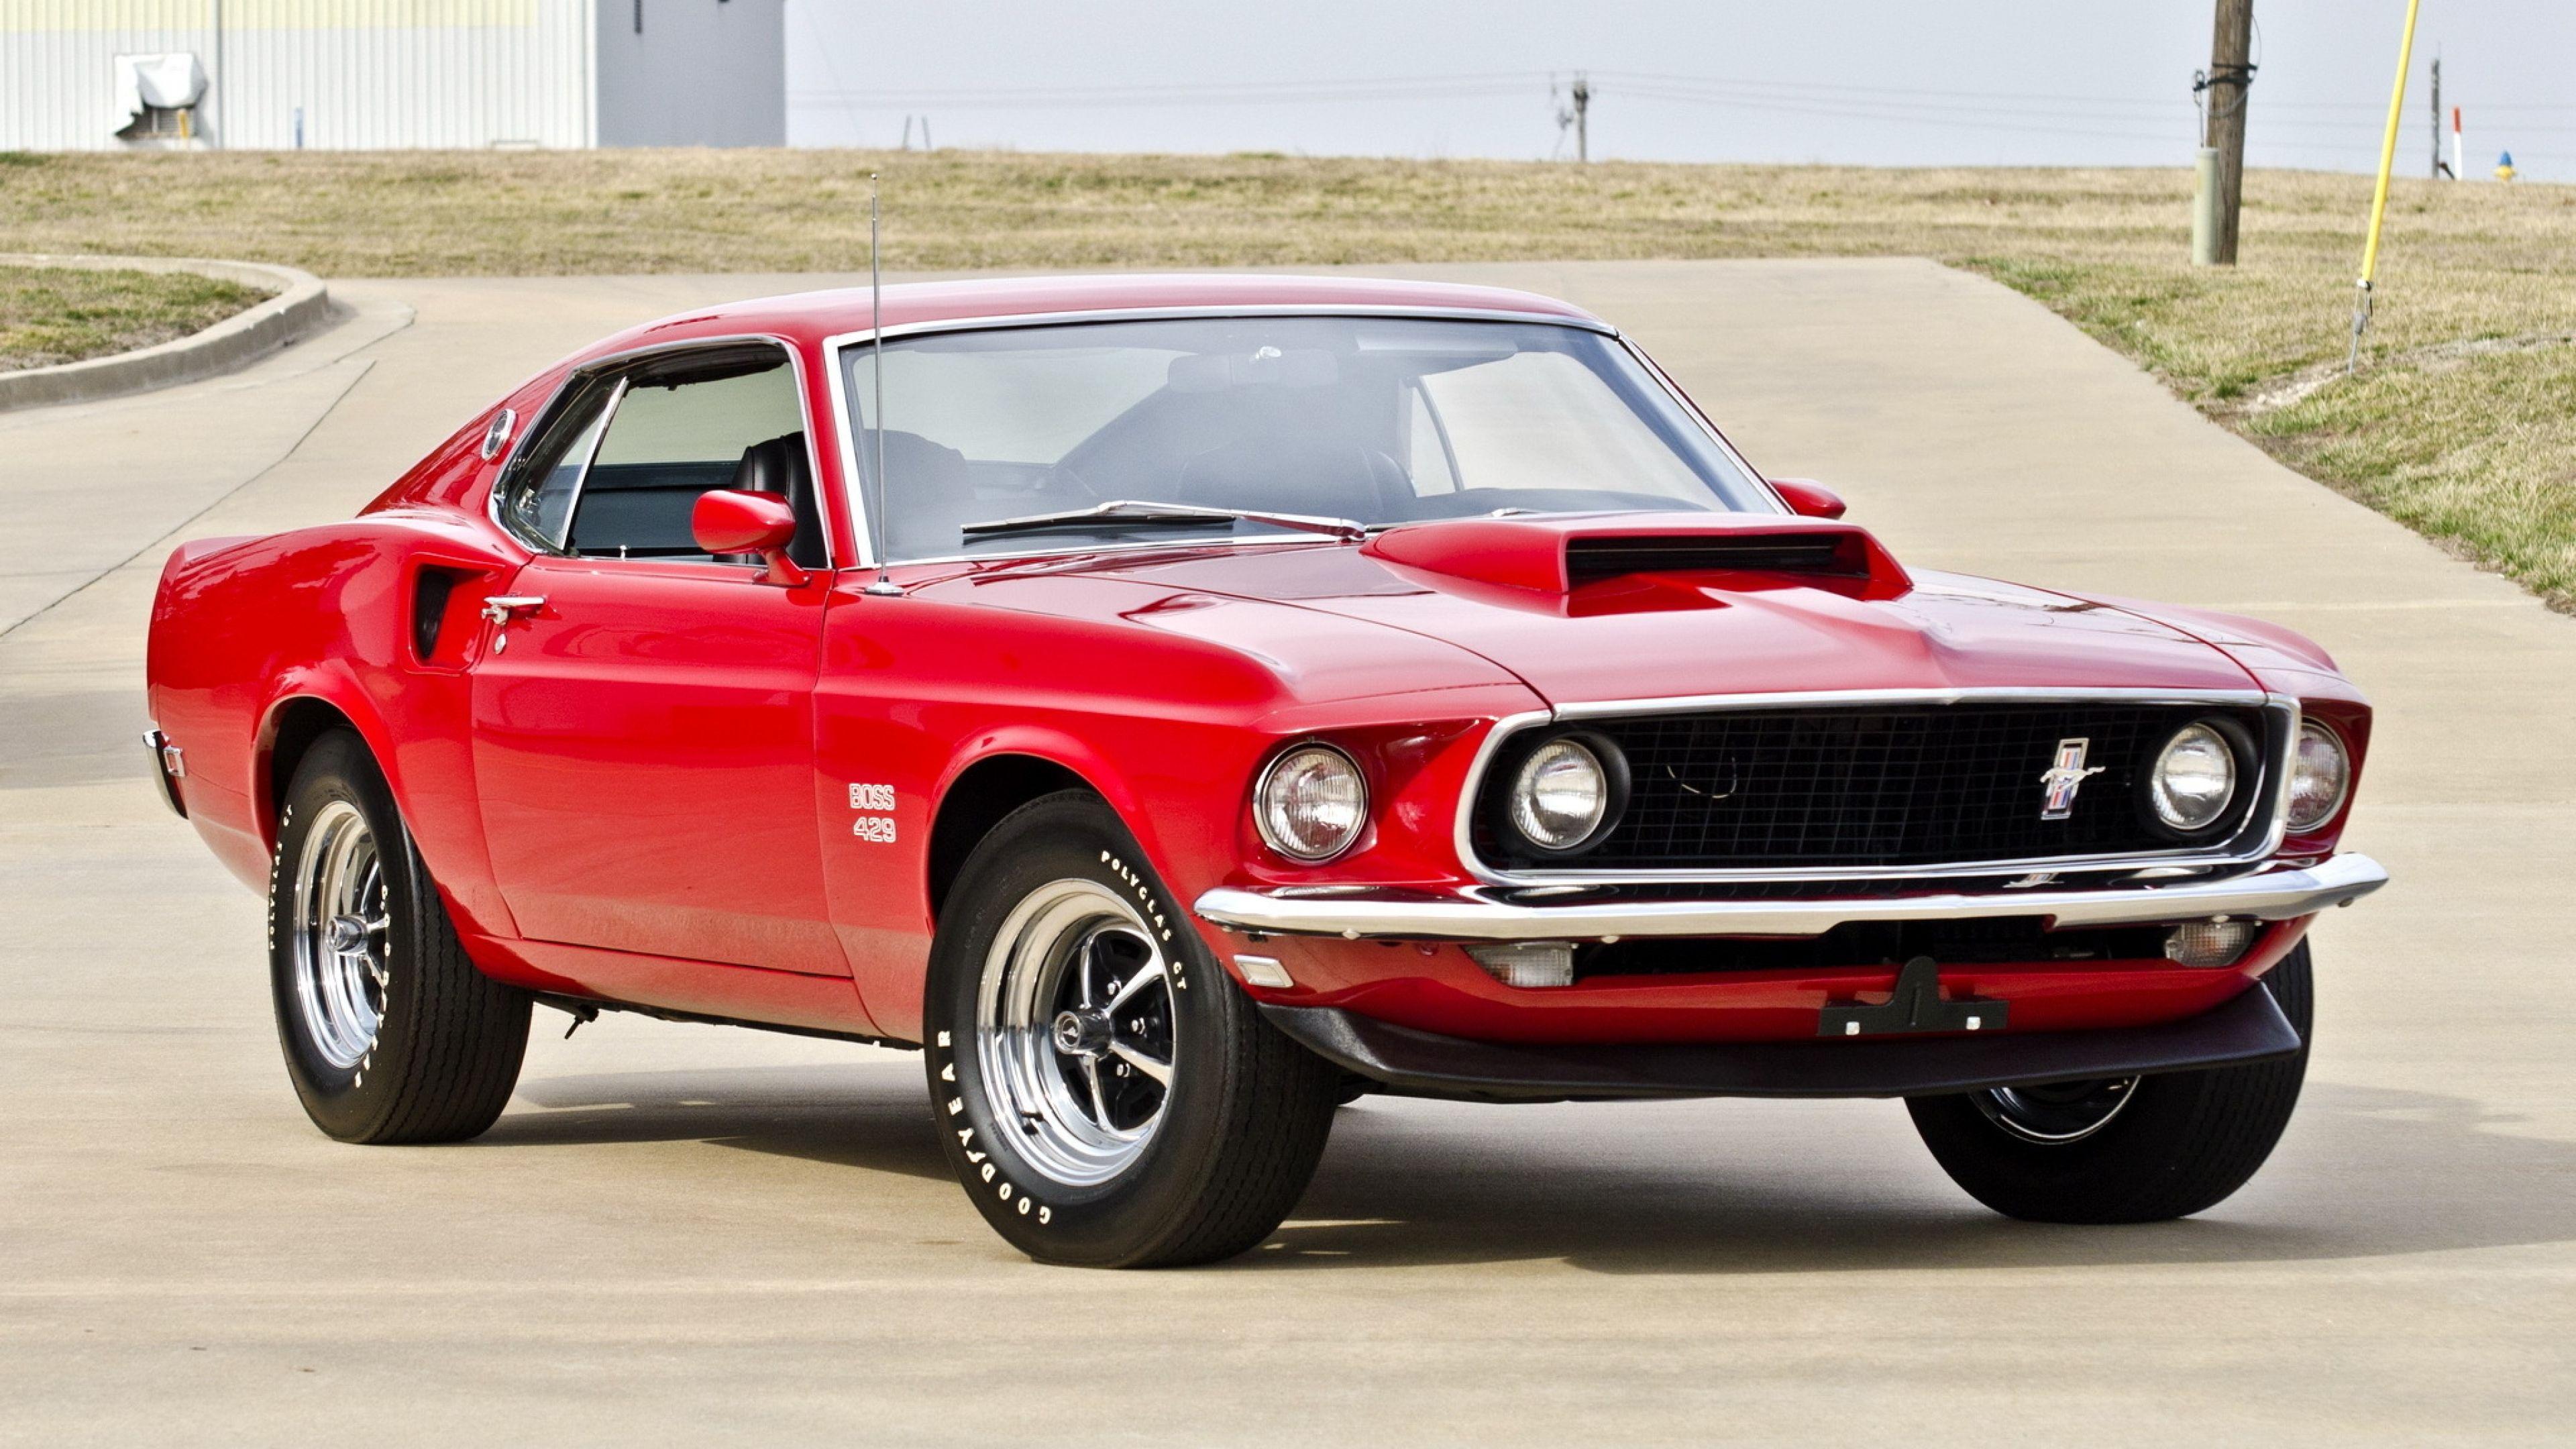 Download Wallpaper 3840x2160 Boss, Muscle car, Ford, Red